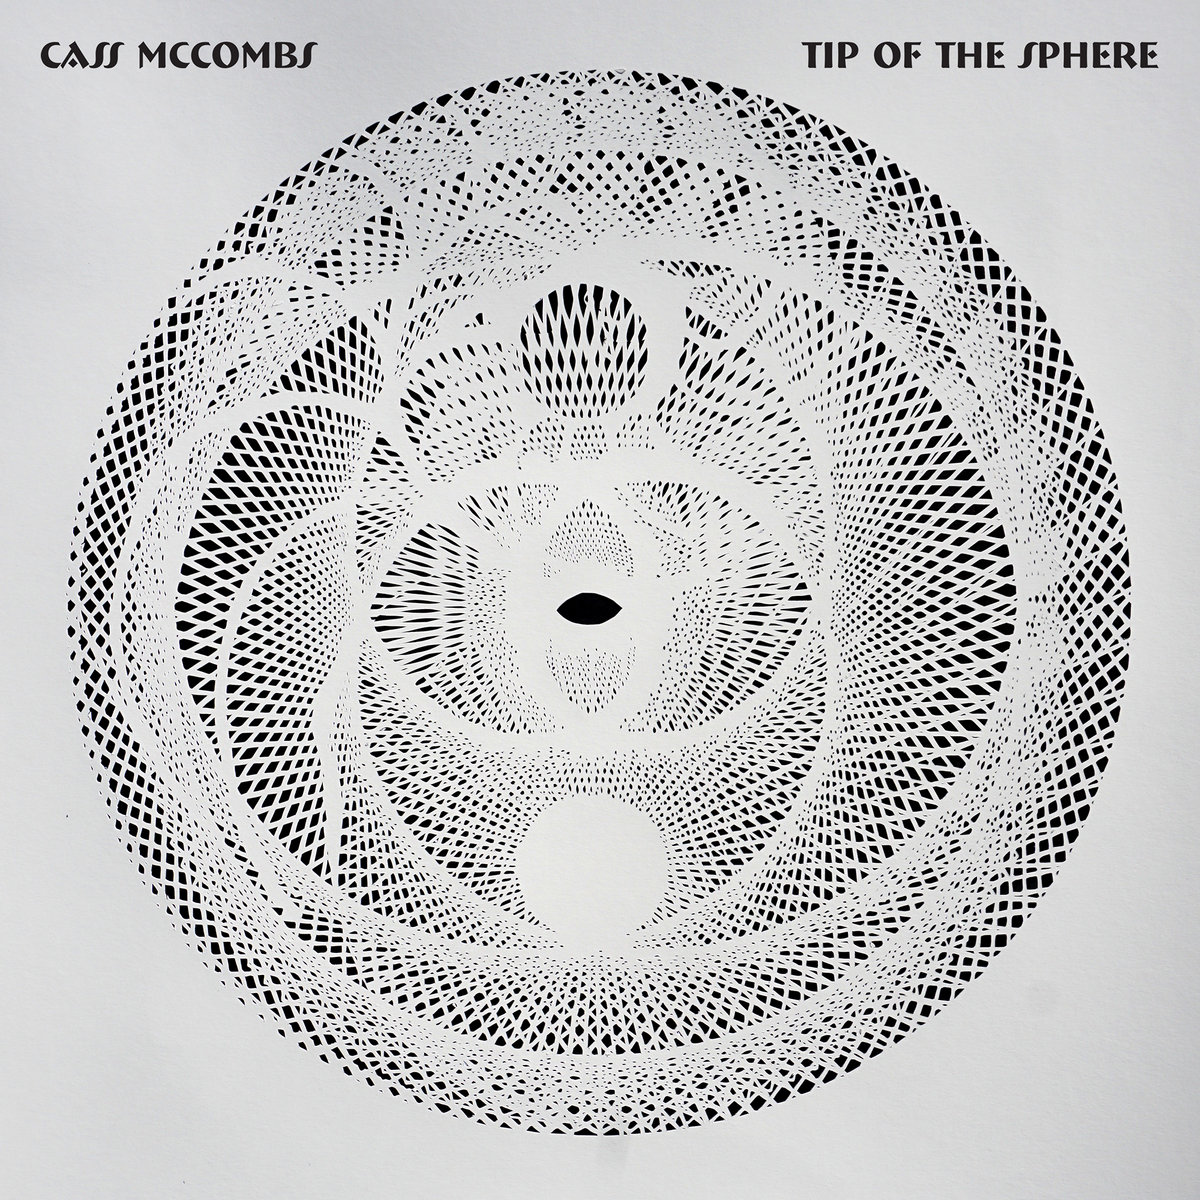 Cass McCombs — tip of the sphere